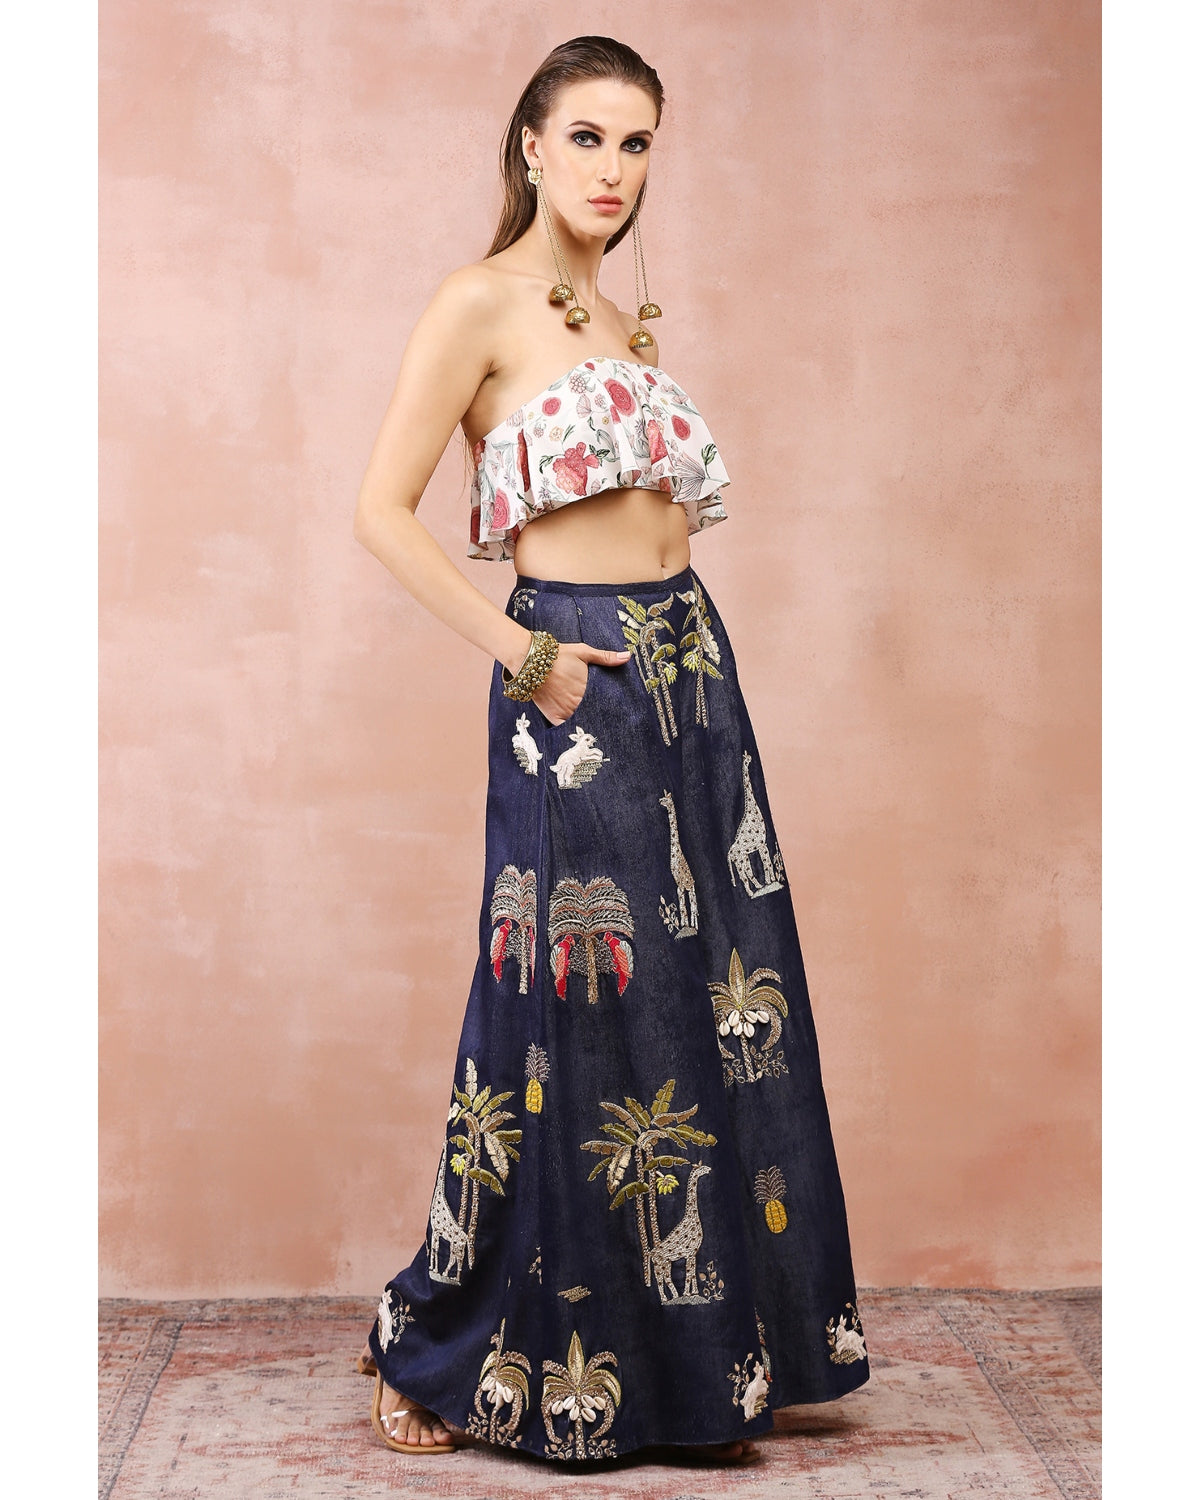 Off-white Printed Co-Ord Set  Co ords outfits, Pants set, Co ords outfits  indian